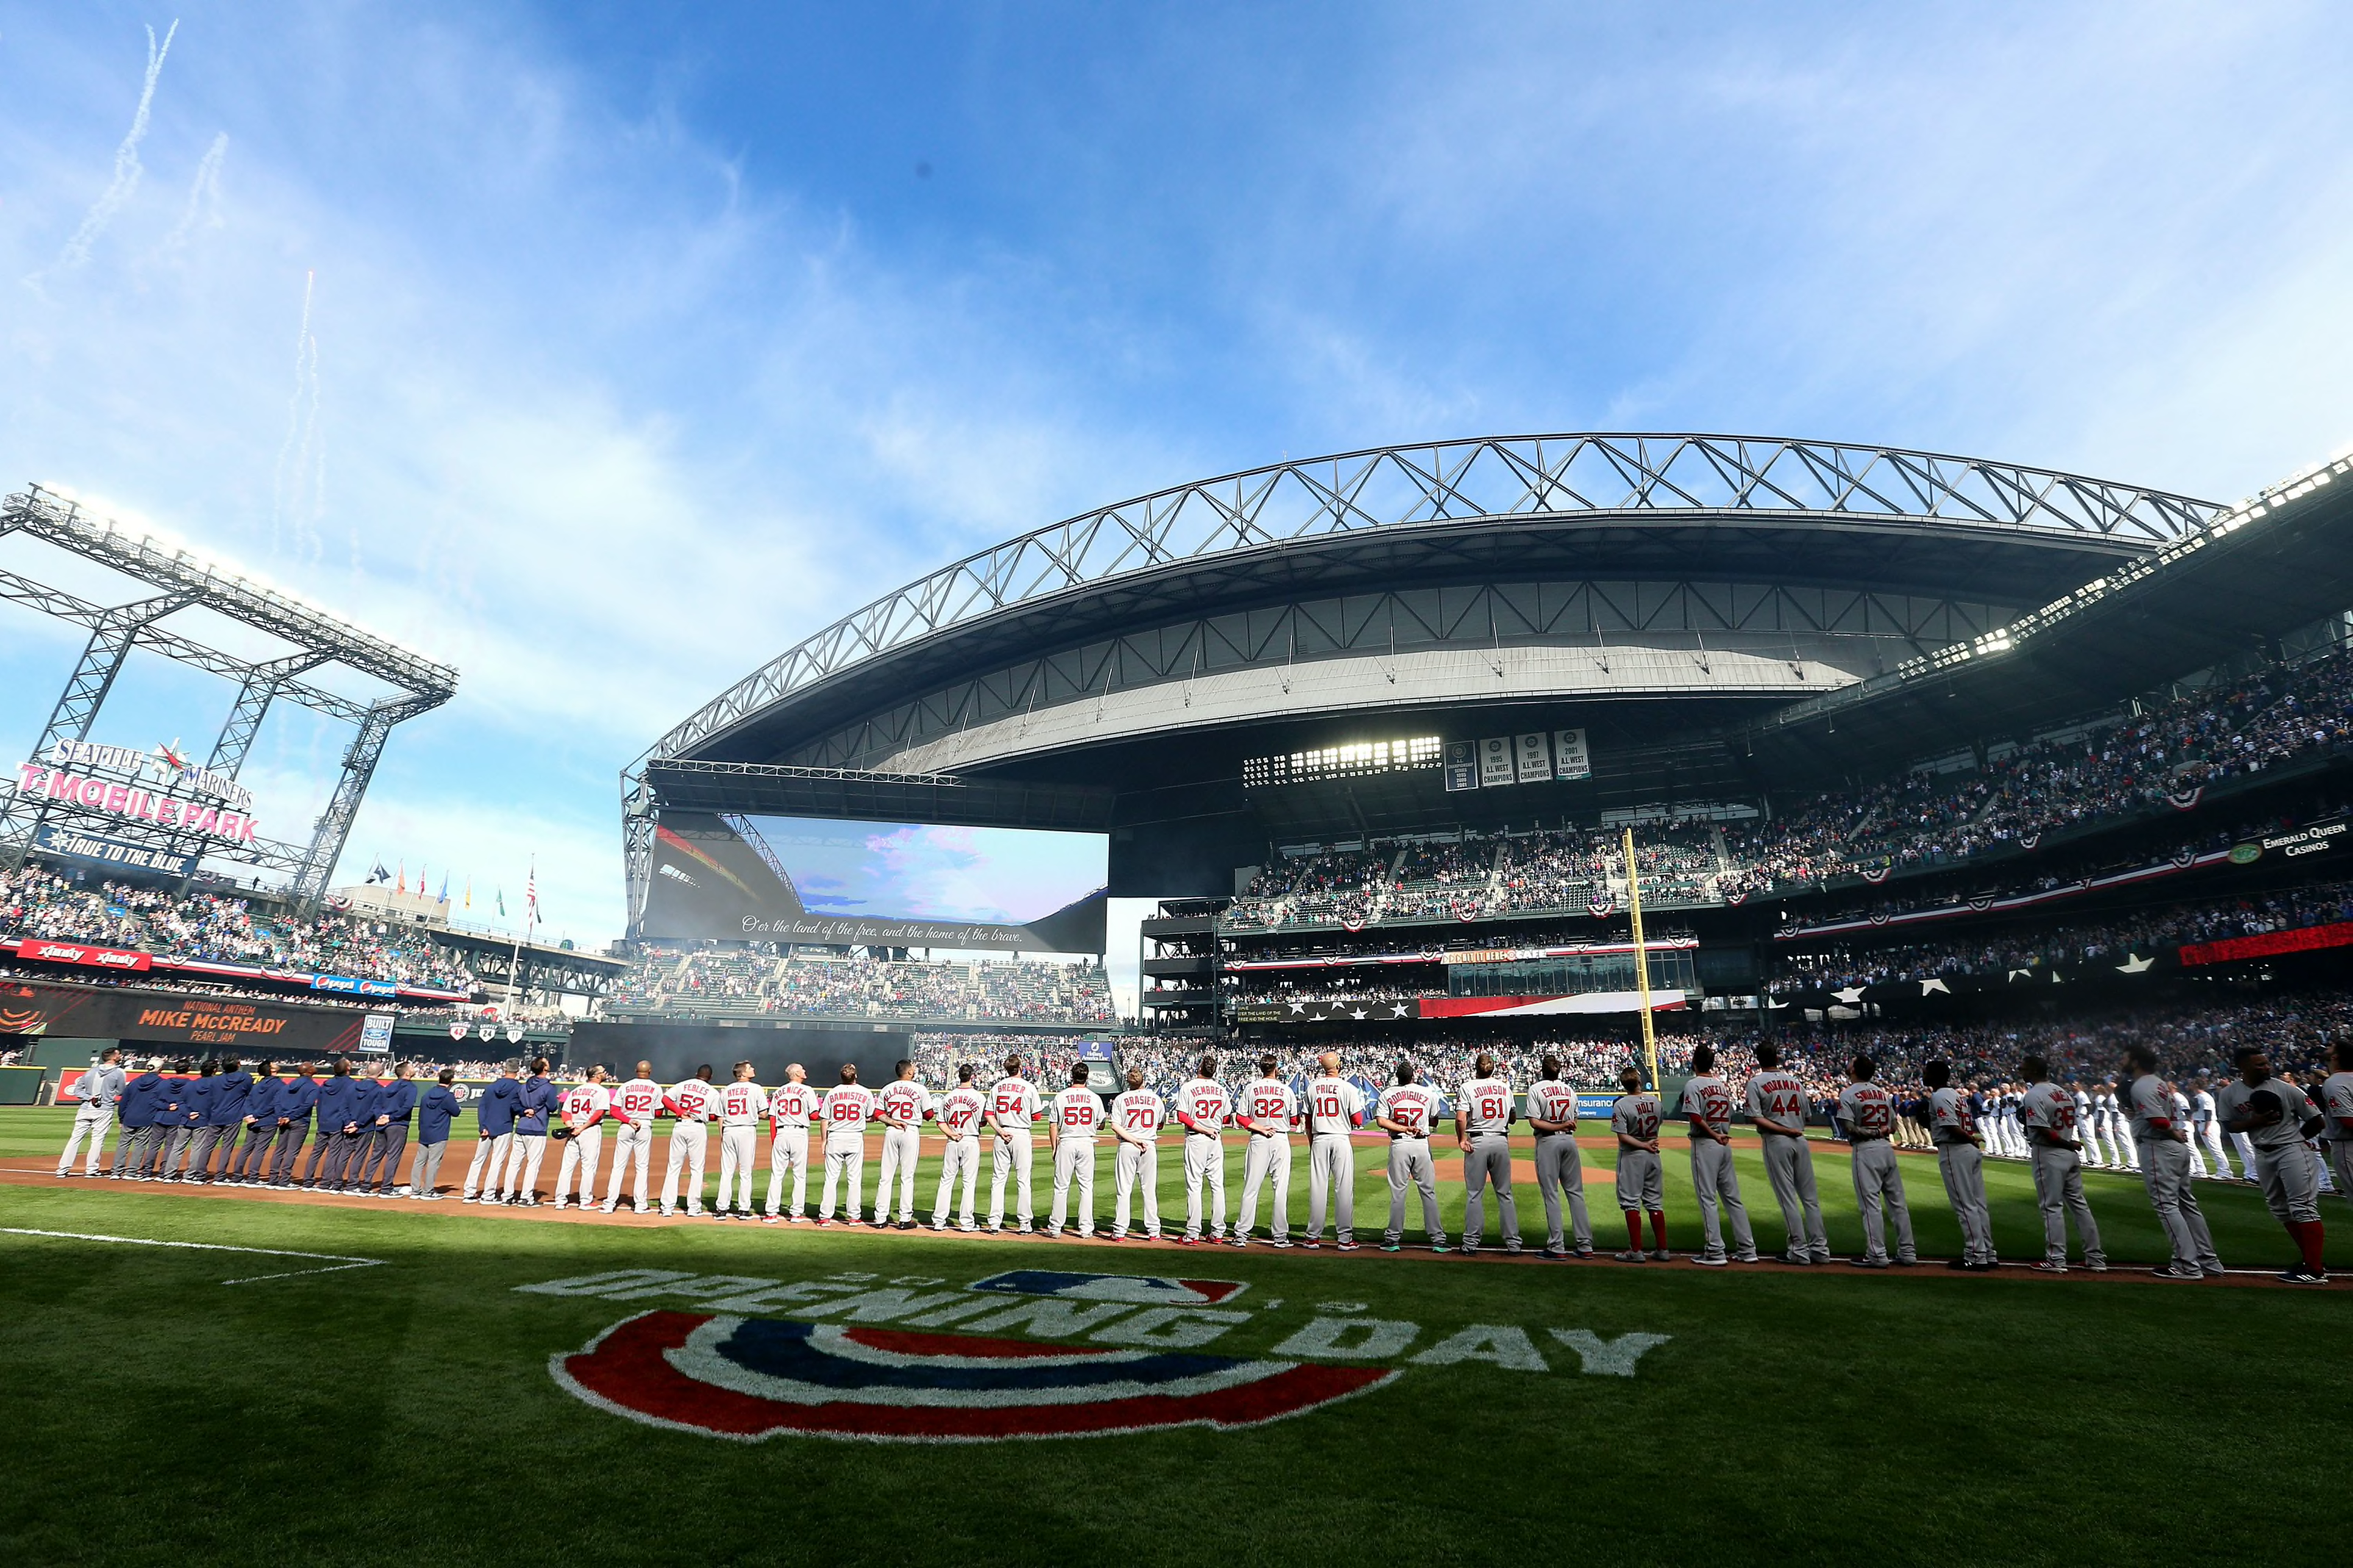 Seattle Mariners It's 100 days until Opening Day! Well, maybe not